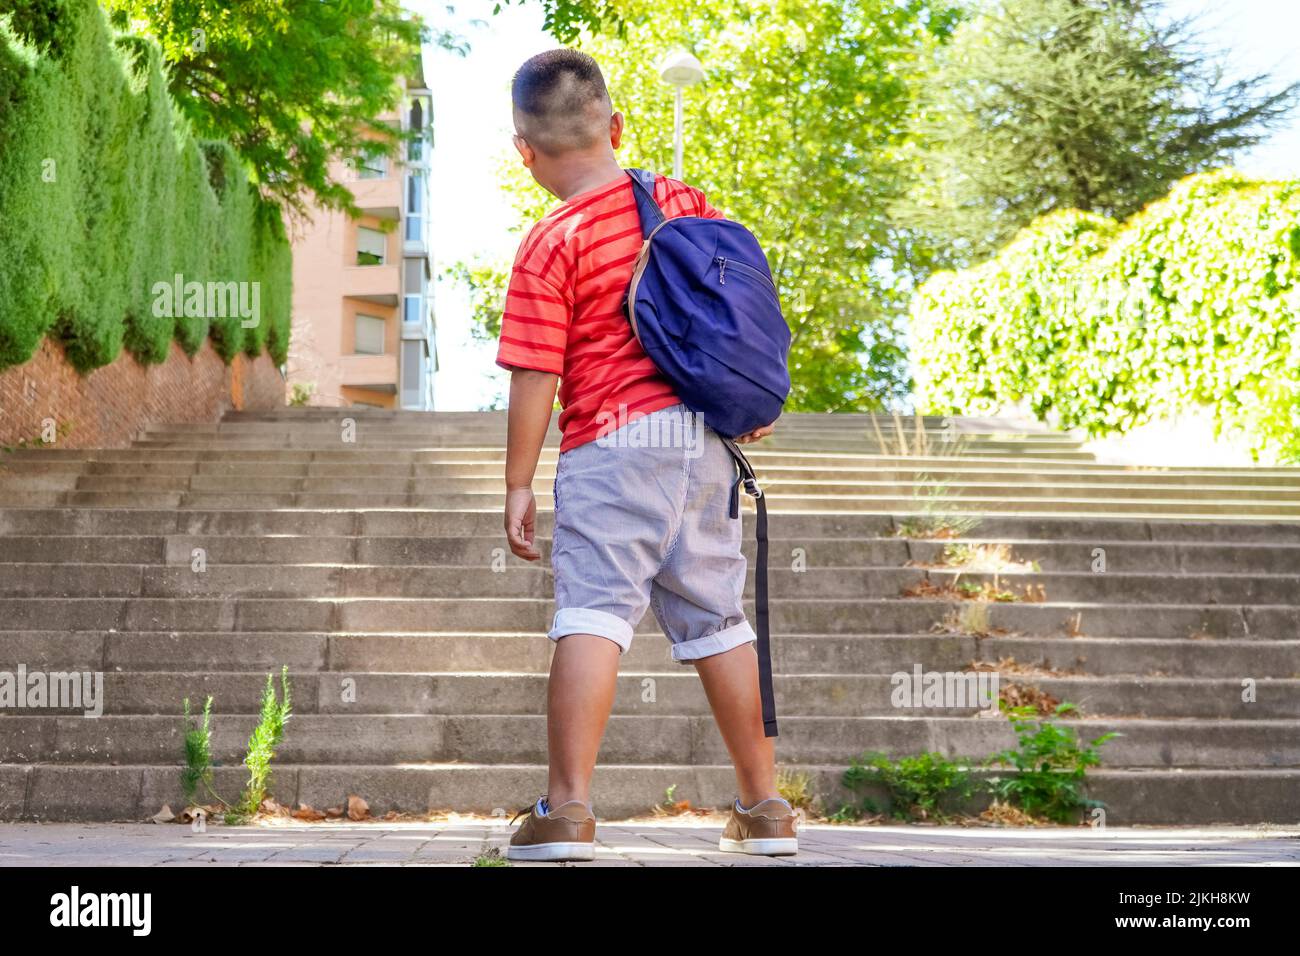 Filipino boy with backpack on the way to school. Back to school concept. Multiethnic children group Stock Photo